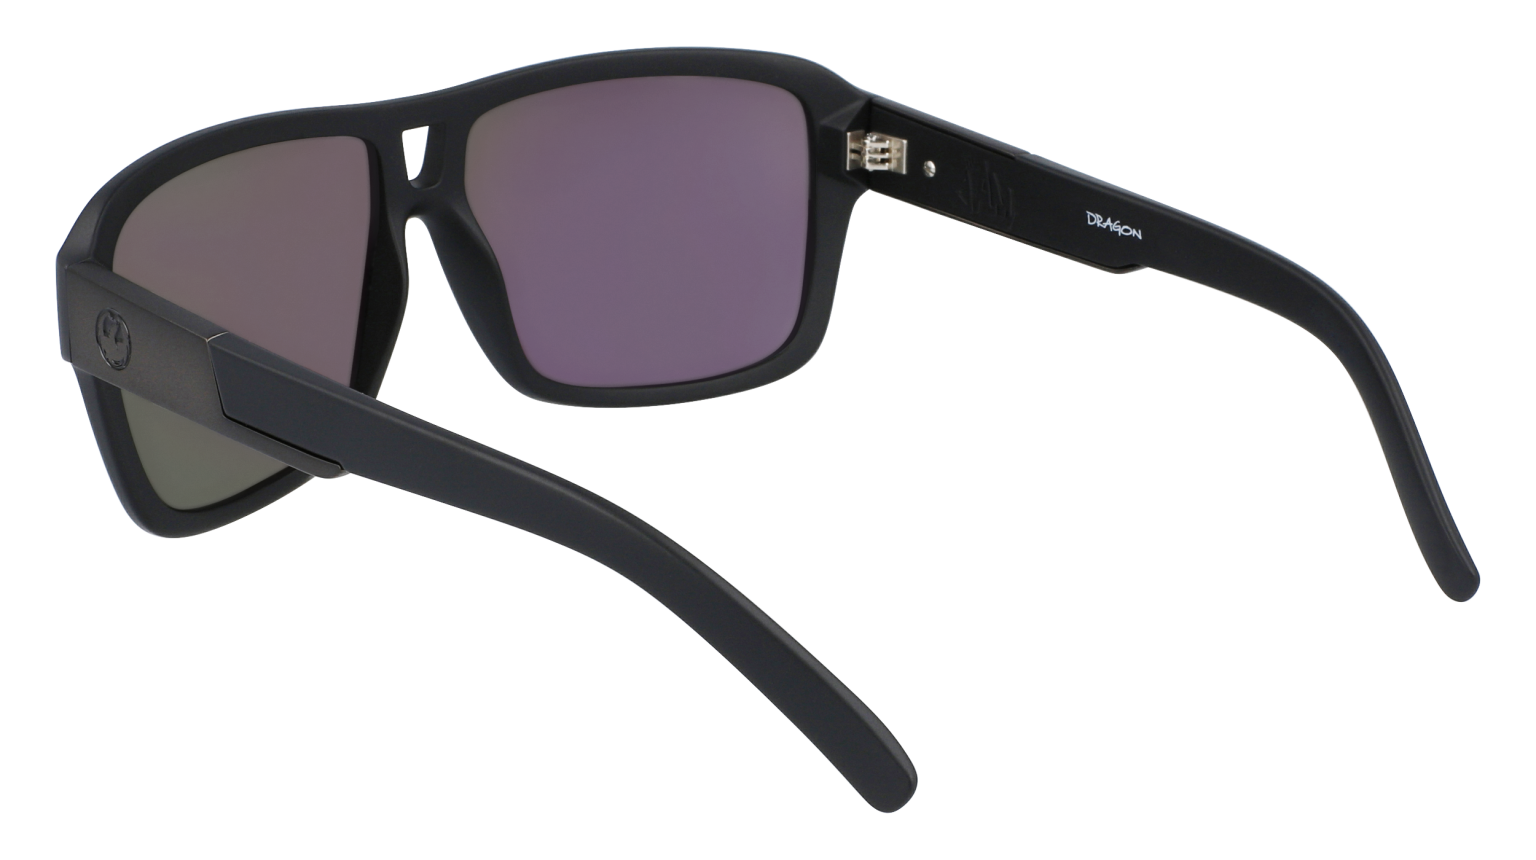 THE JAM - Matte Black with Lumalens Green Ionized Lens